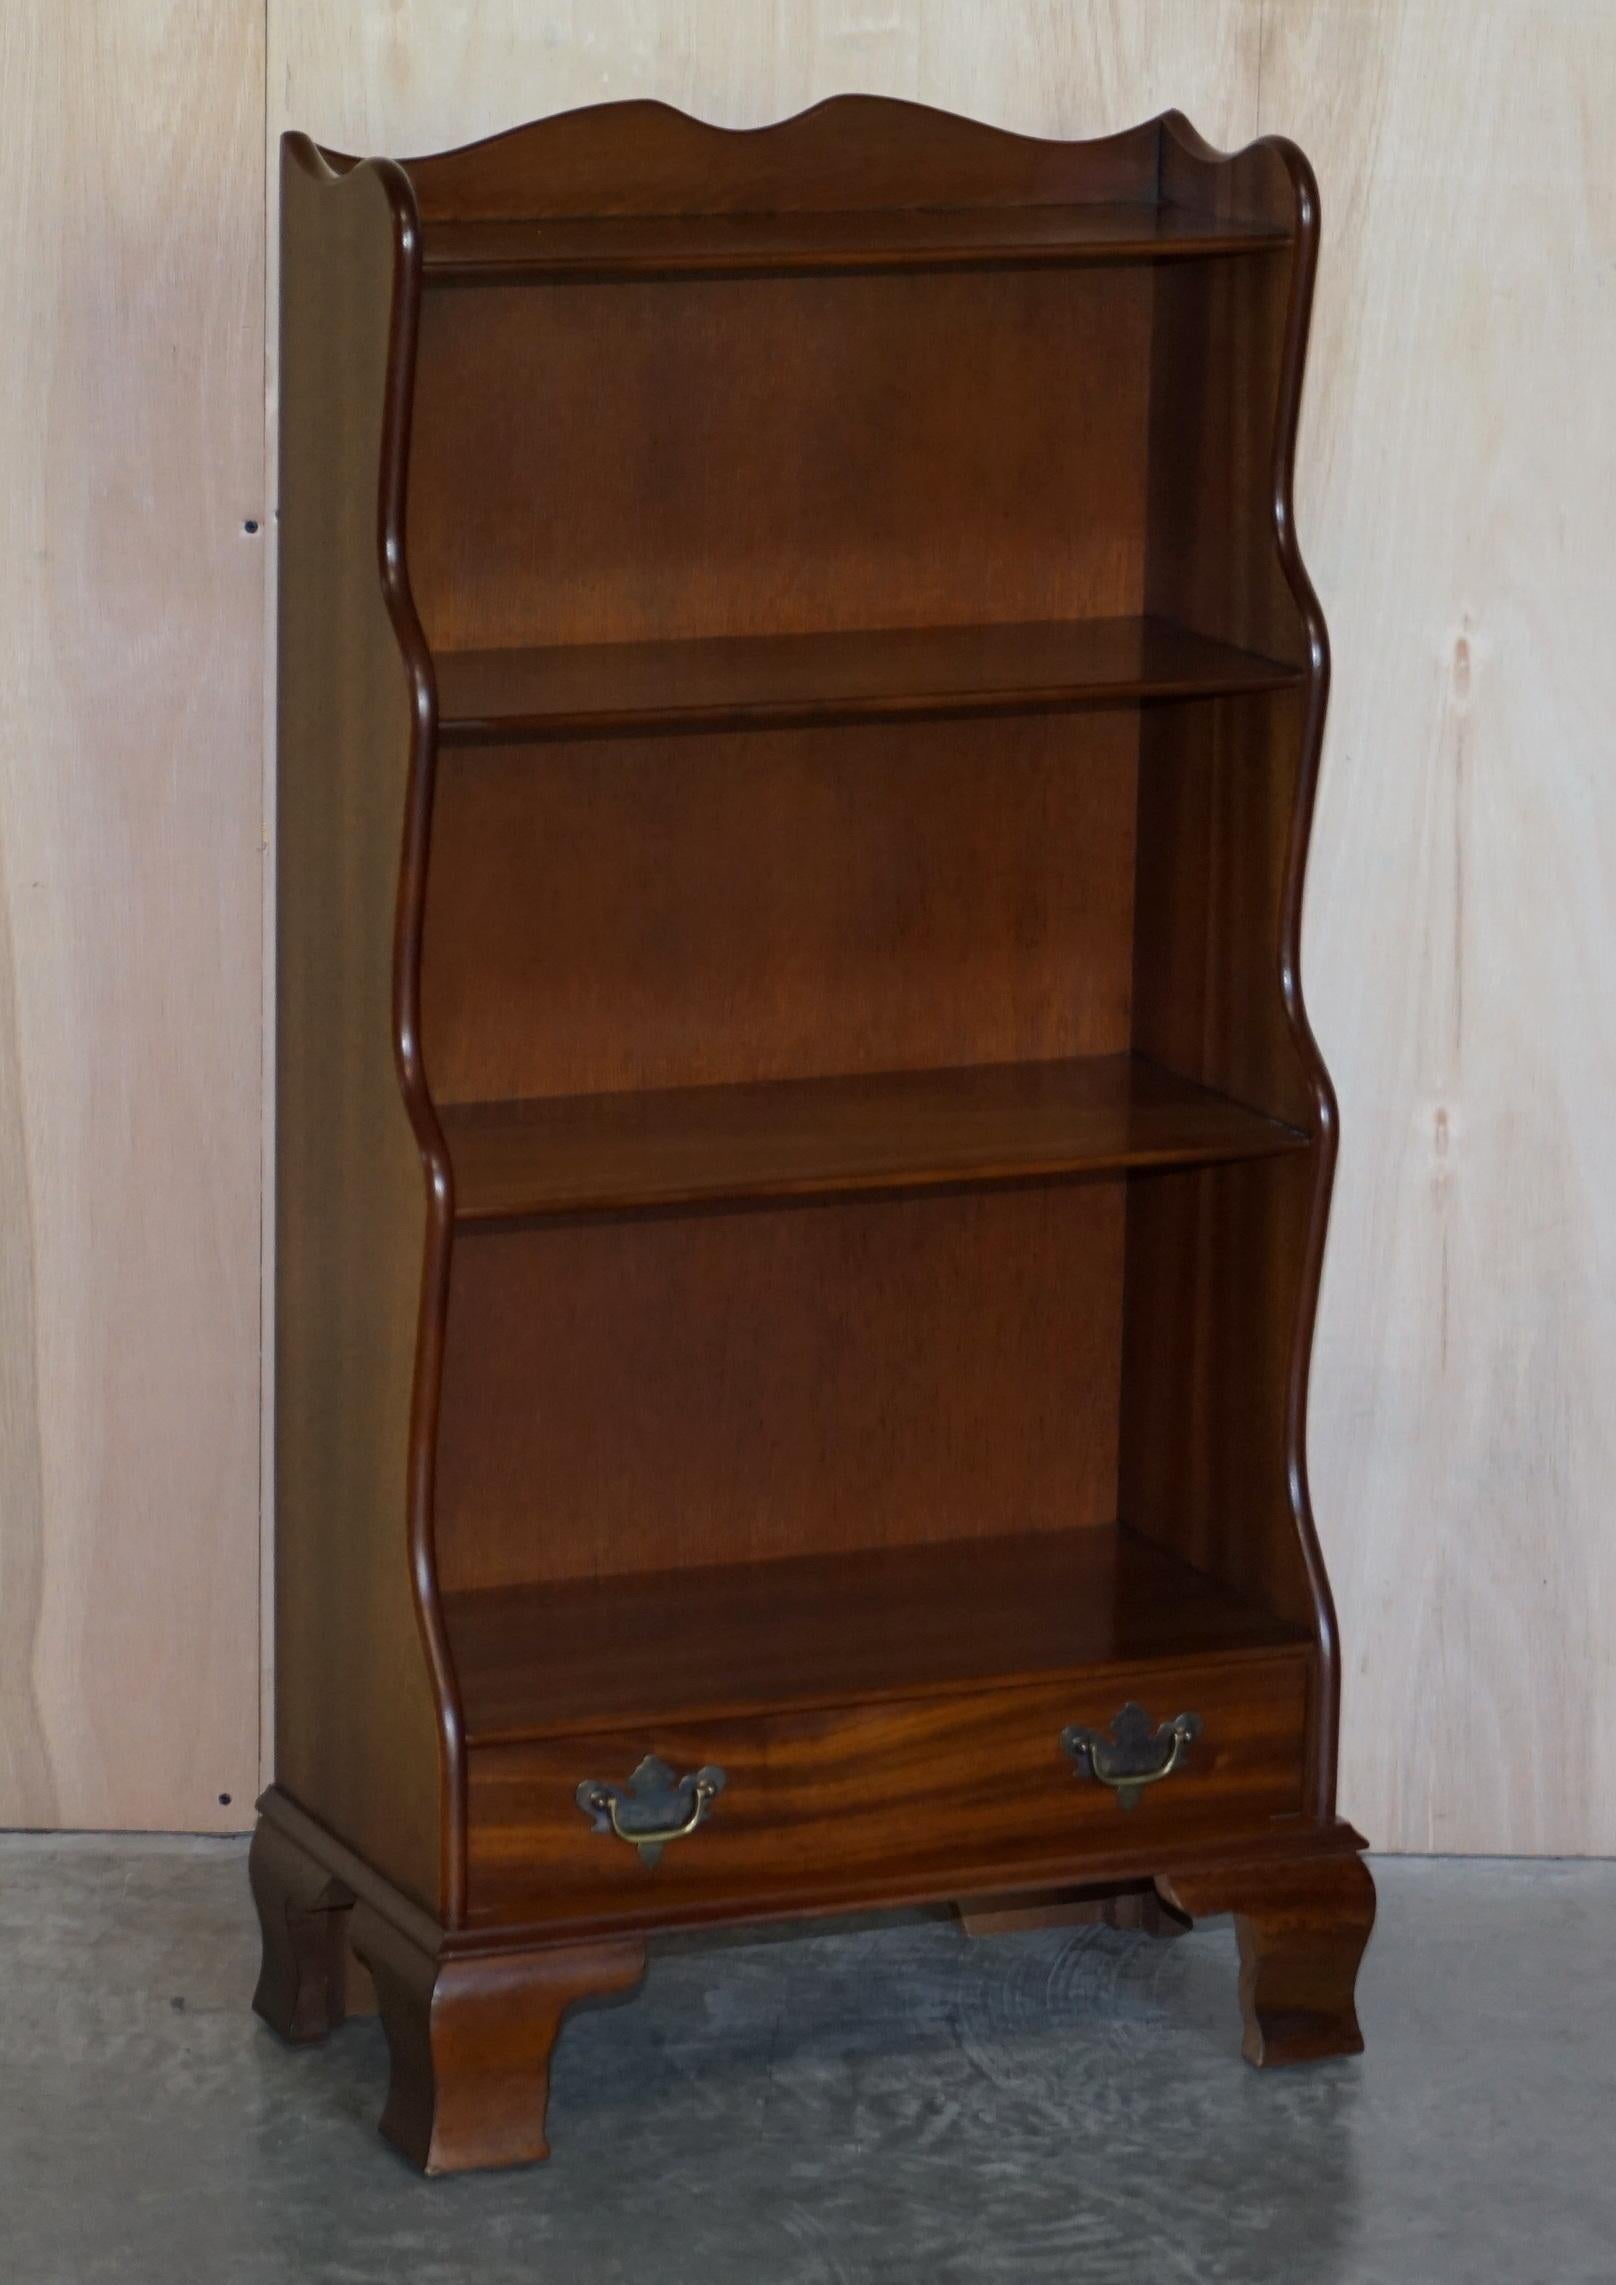 We are delighted to offer for sale this absolutely stunning pair of vintage, solid mahogany dwarf open waterfall bookcases made by J Sydney Smith of England 

A very good looking and well-made pair, extremely decorative and very rare to find a